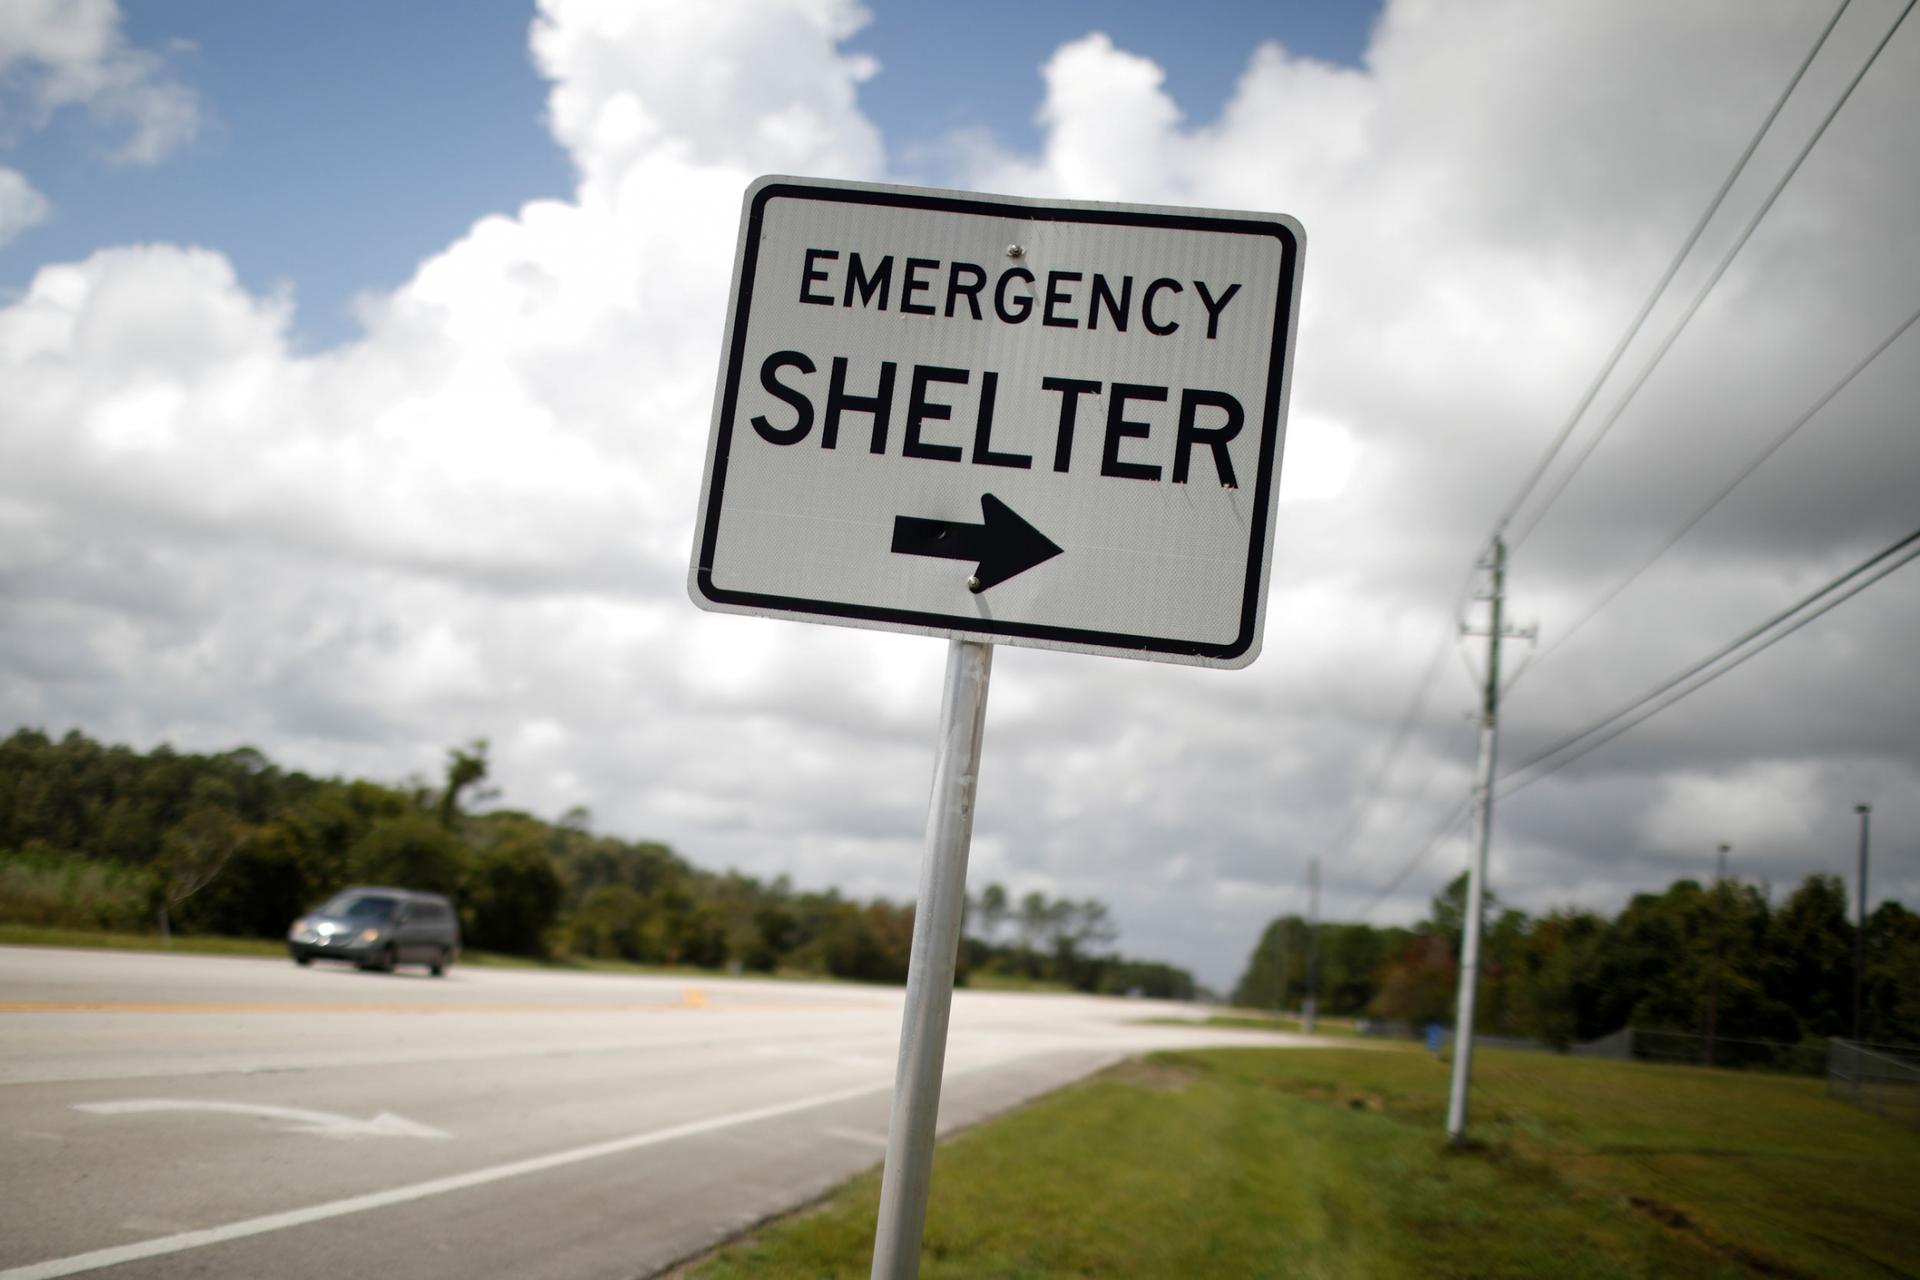 A street sign is shown next to a road with "Emergency Shelter" and an arrow pointed to the right printed on it.